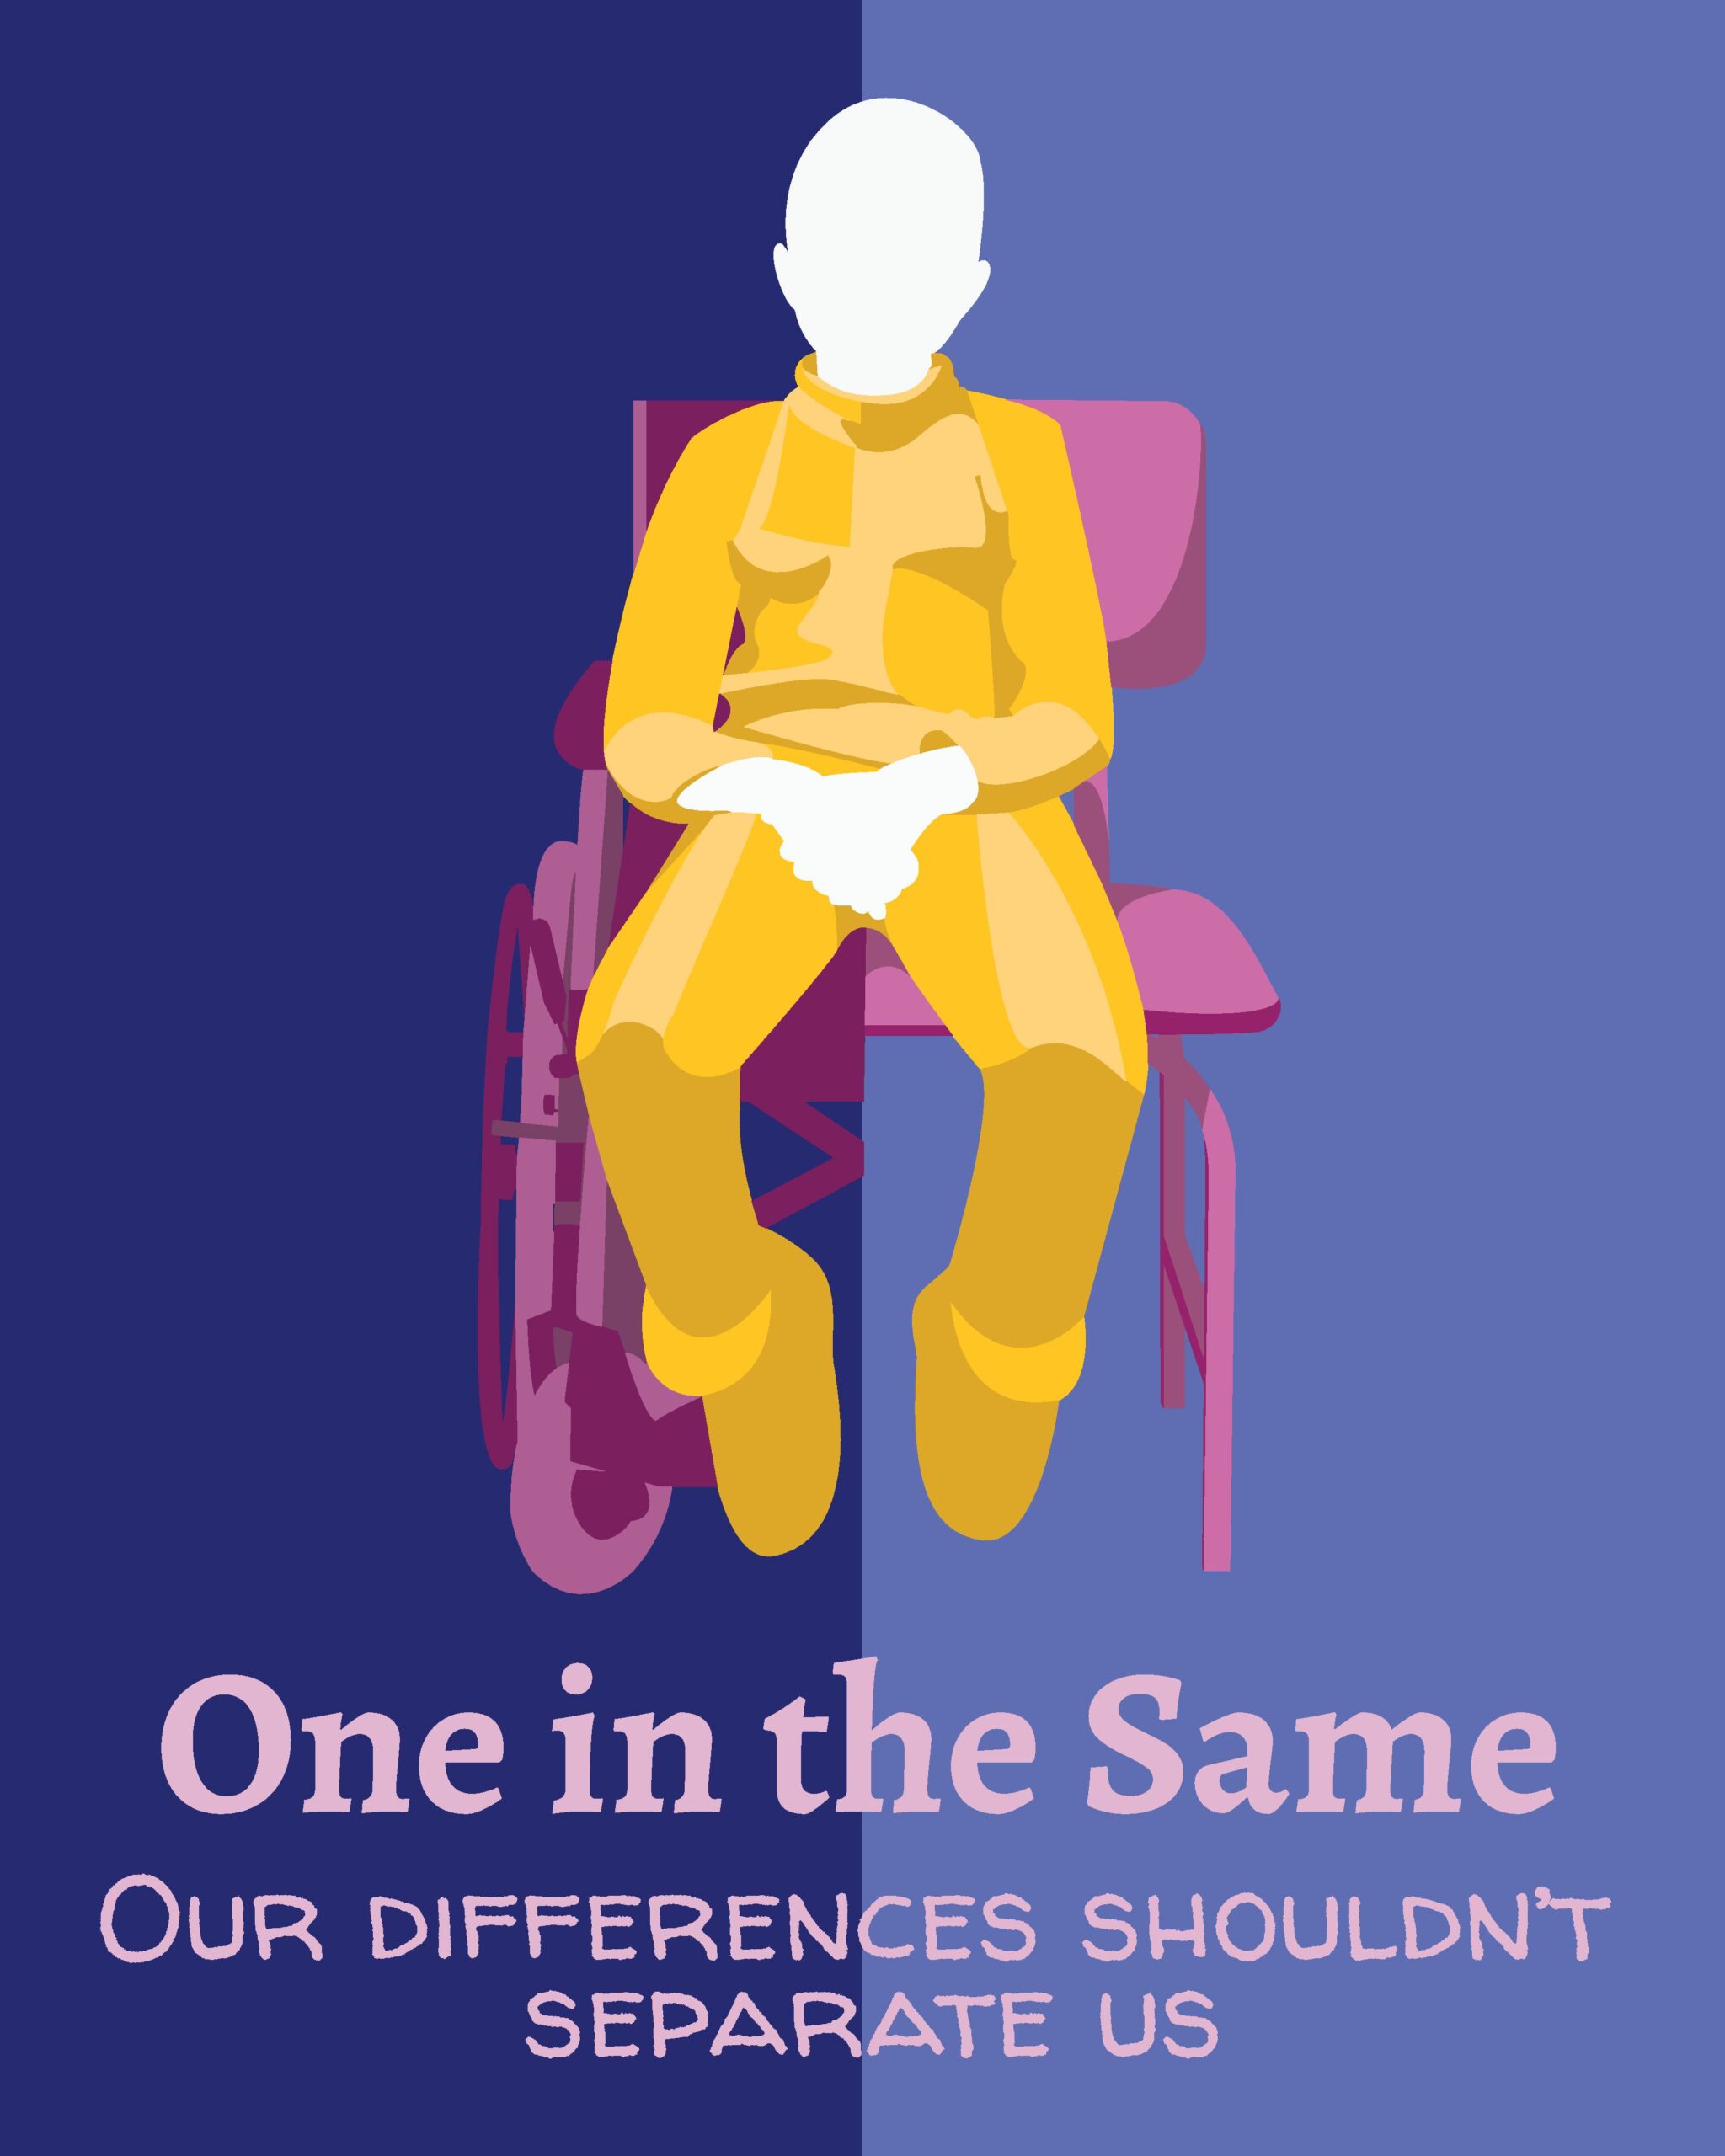 A students social issue poster project. It is on disability rights. In the middle there is a human that is half in a wheelchair and half in a chair.